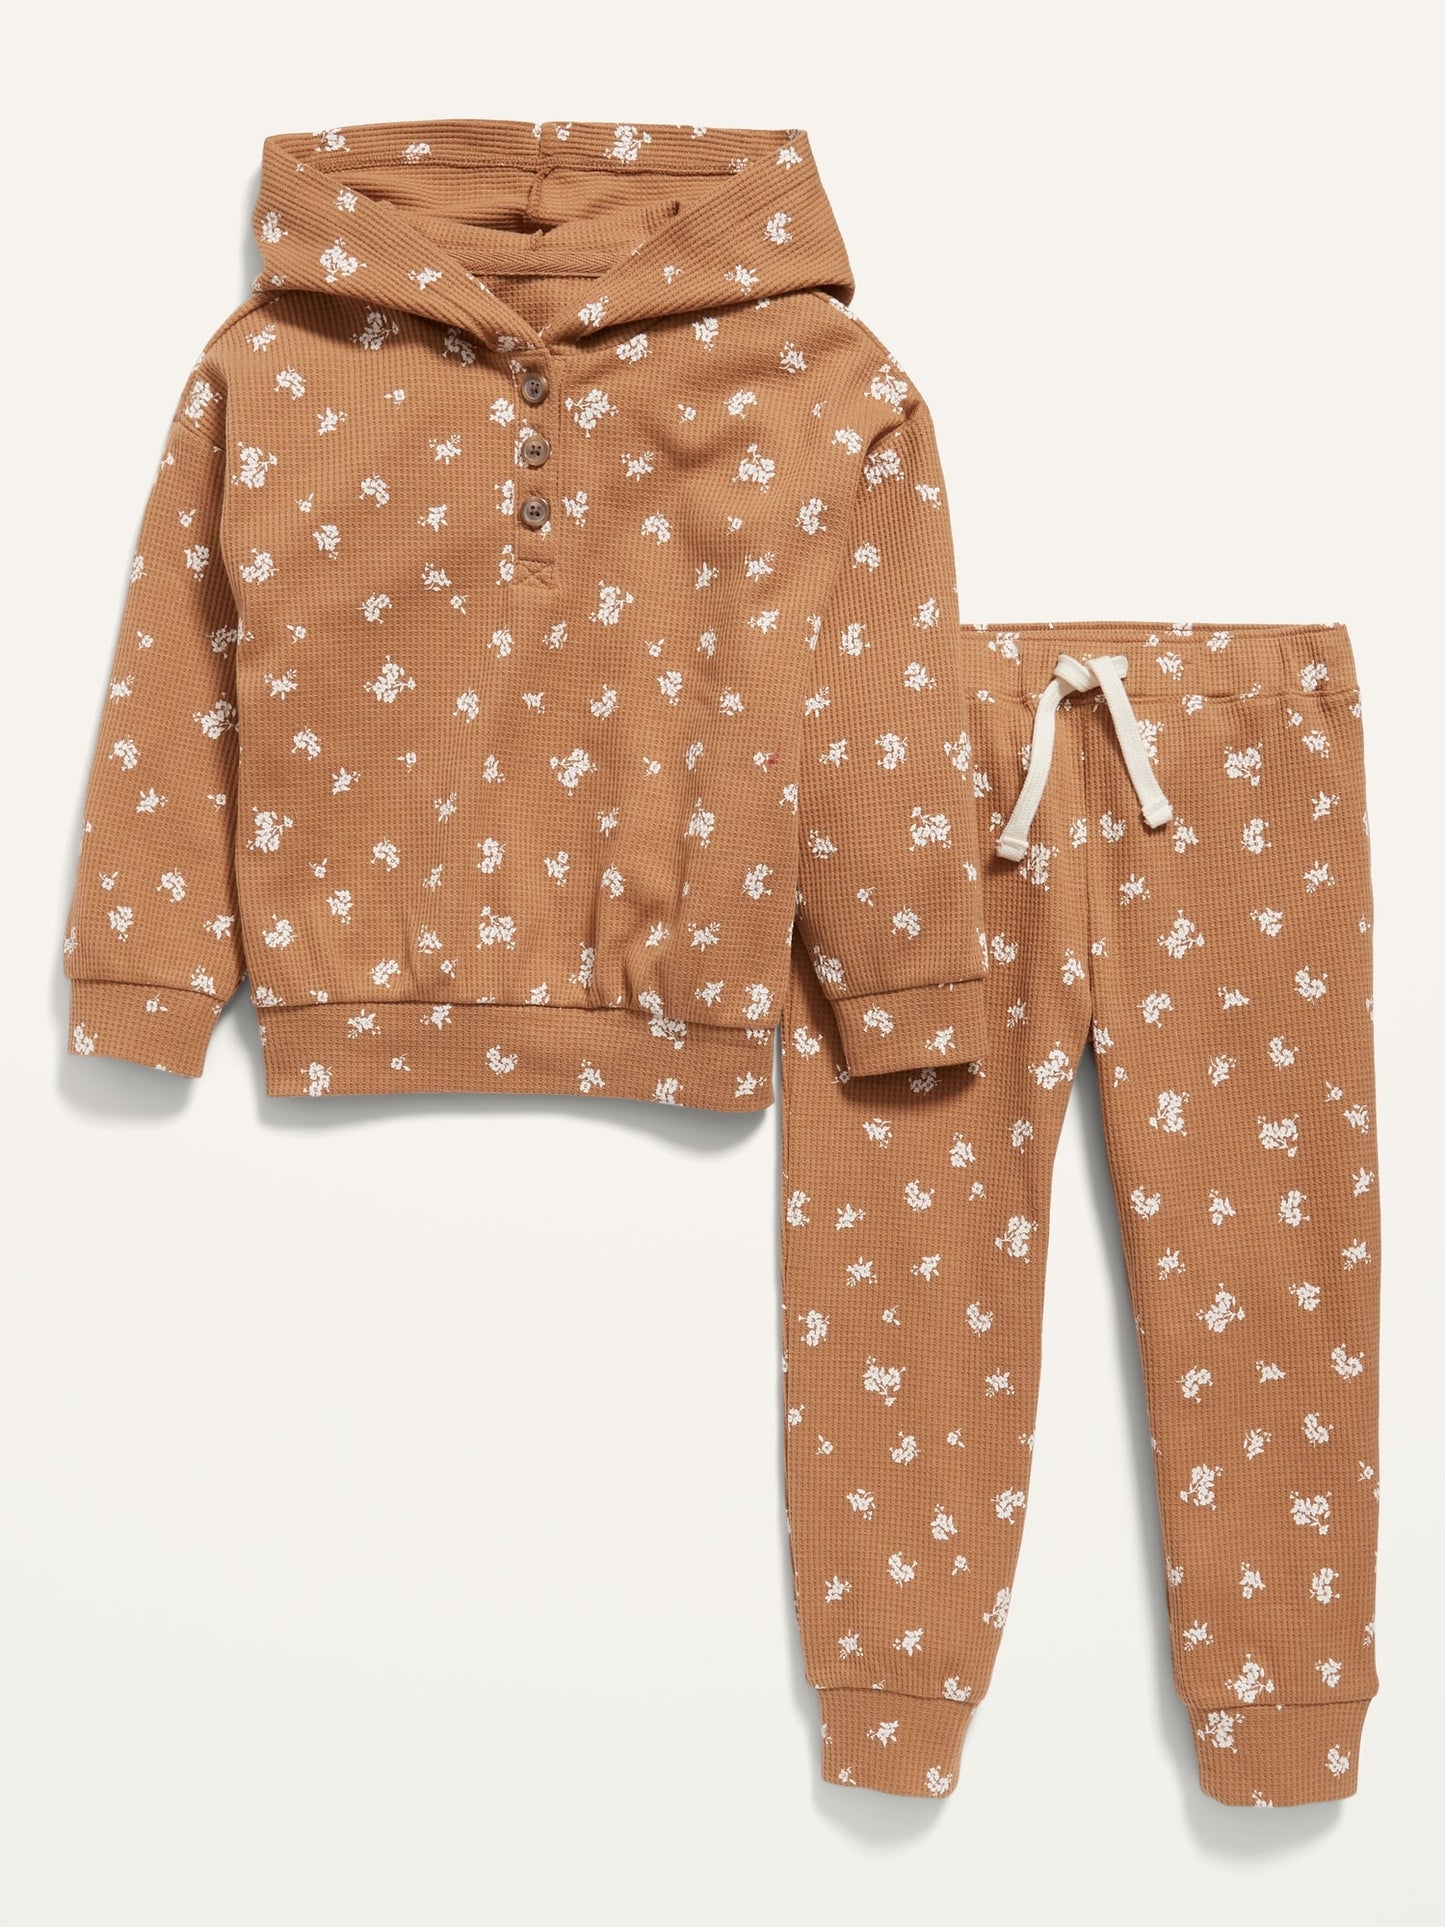 Thermal-Knit Henley Hoodie and Sweatpants Set for Toddler Girls